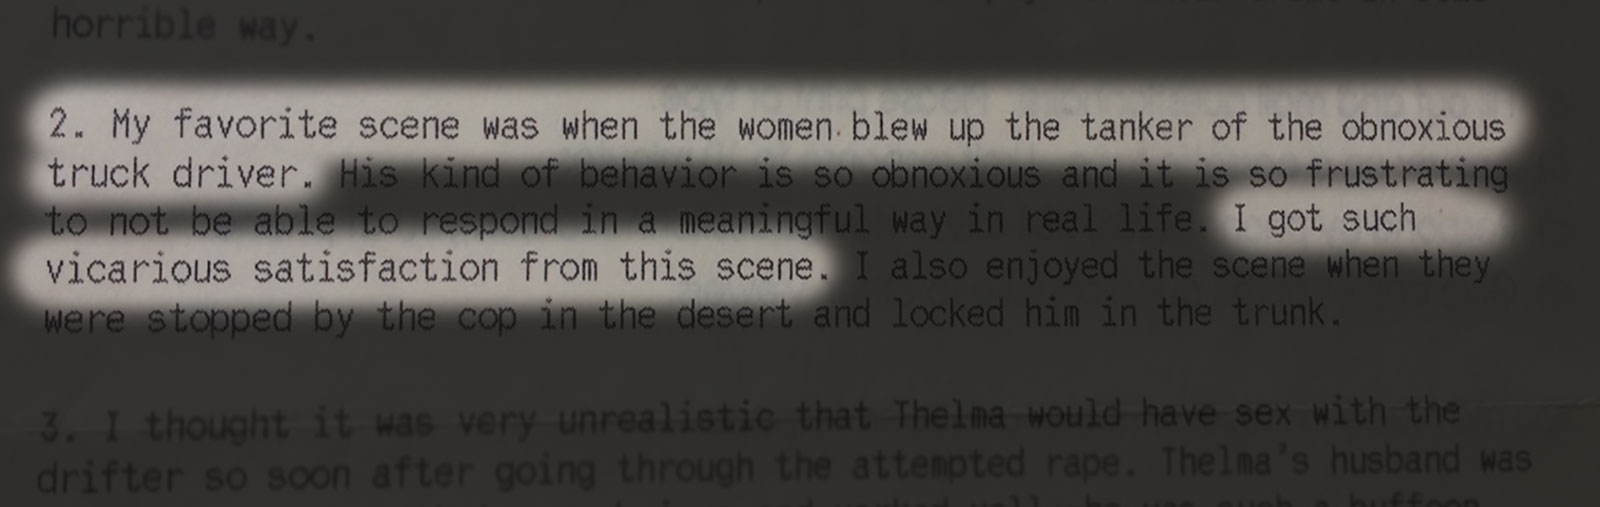 Quote from questionnaire: My favorite scene was when the women blew up the tanker of the obnoxious truck driver. I got such vicarious satisfaction from this scene.